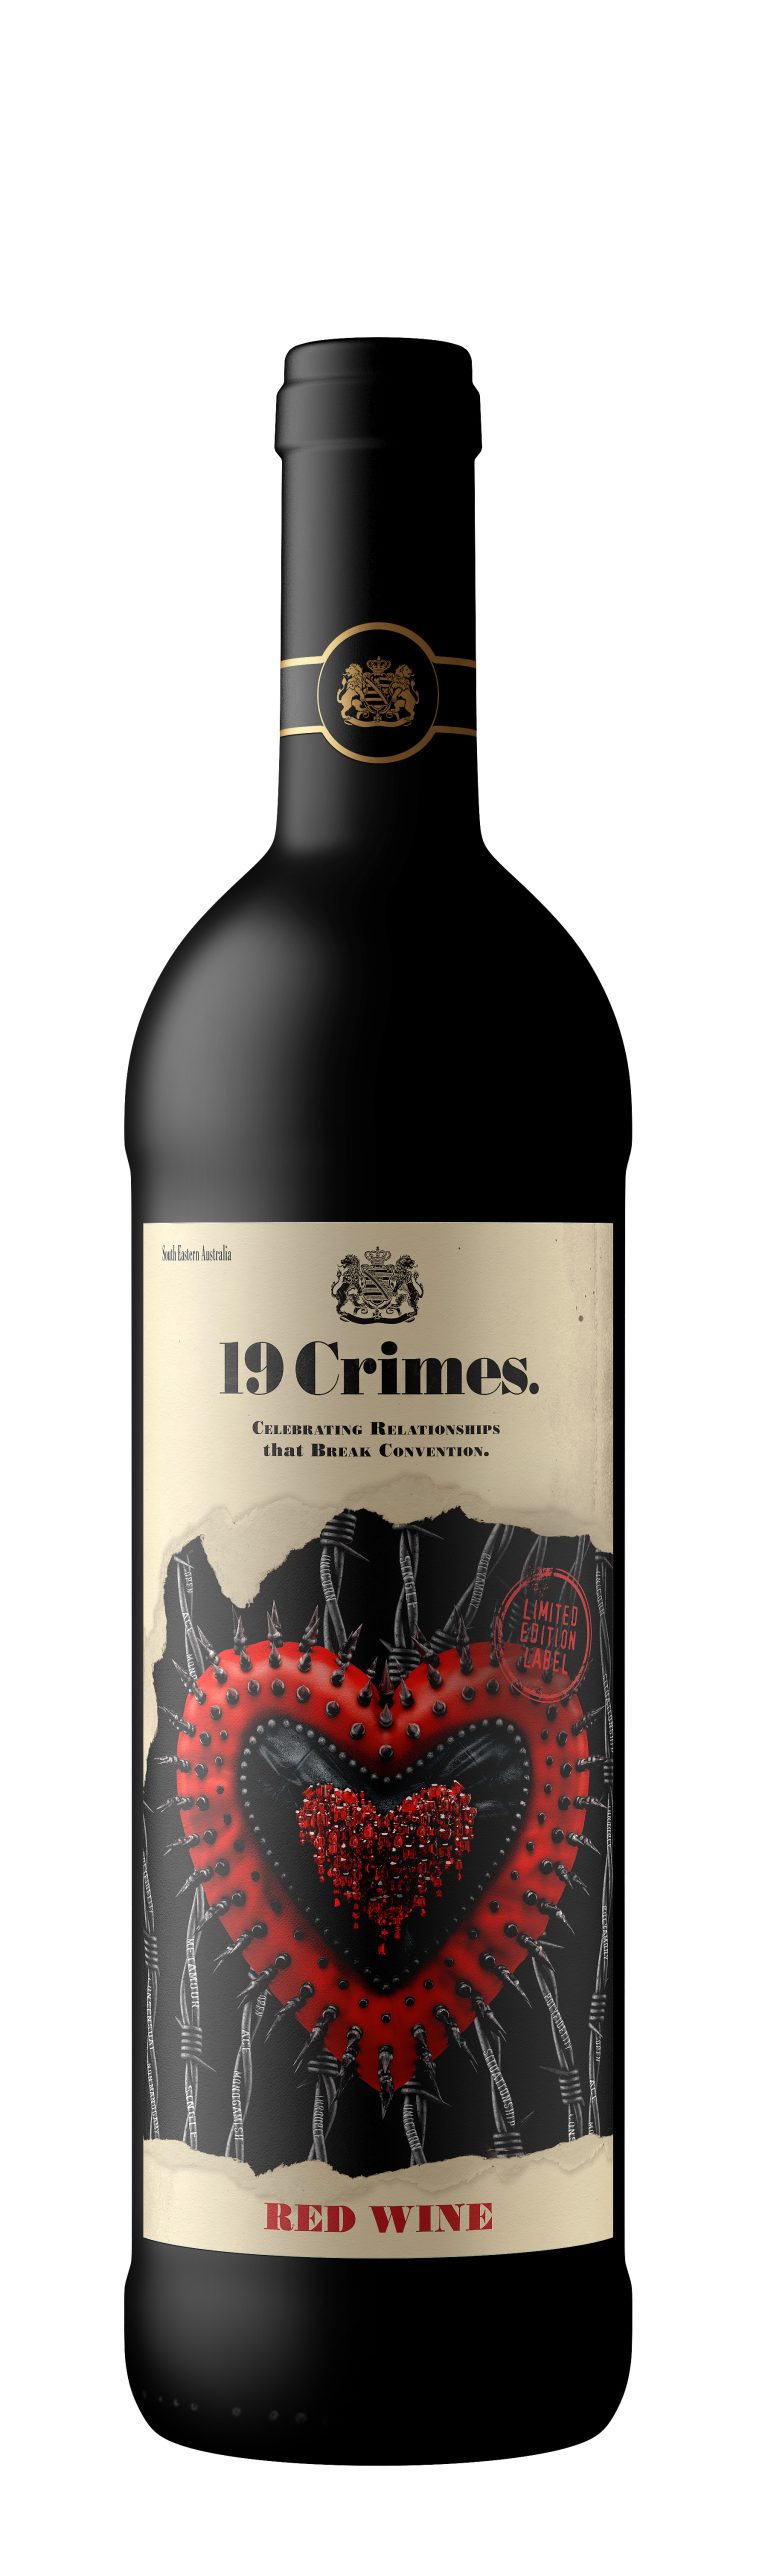 19 Crimes launches limited-edition Valentine’s Day label